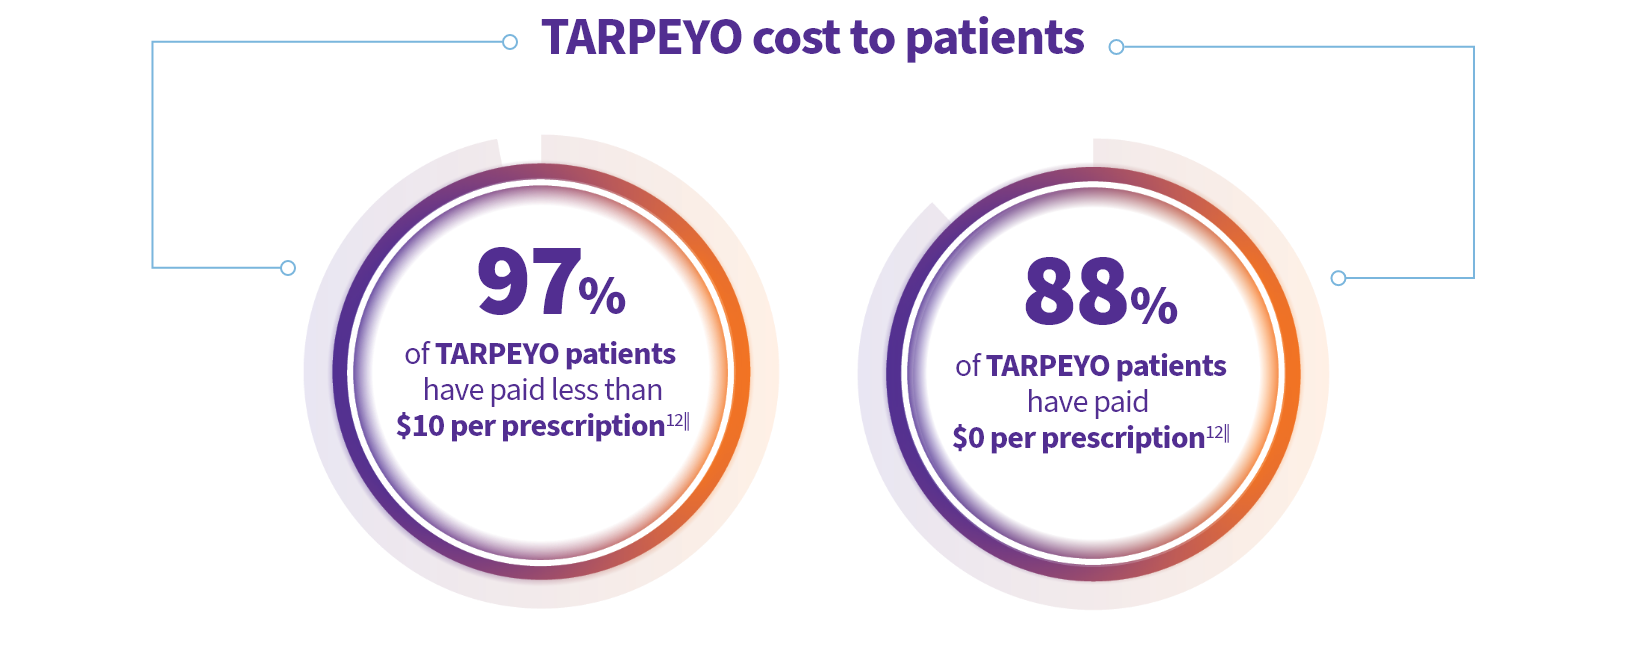 Graphic displaying that 97% of TARPEYO patients have paid less than $10 per prescription, and 88% have paid $0.